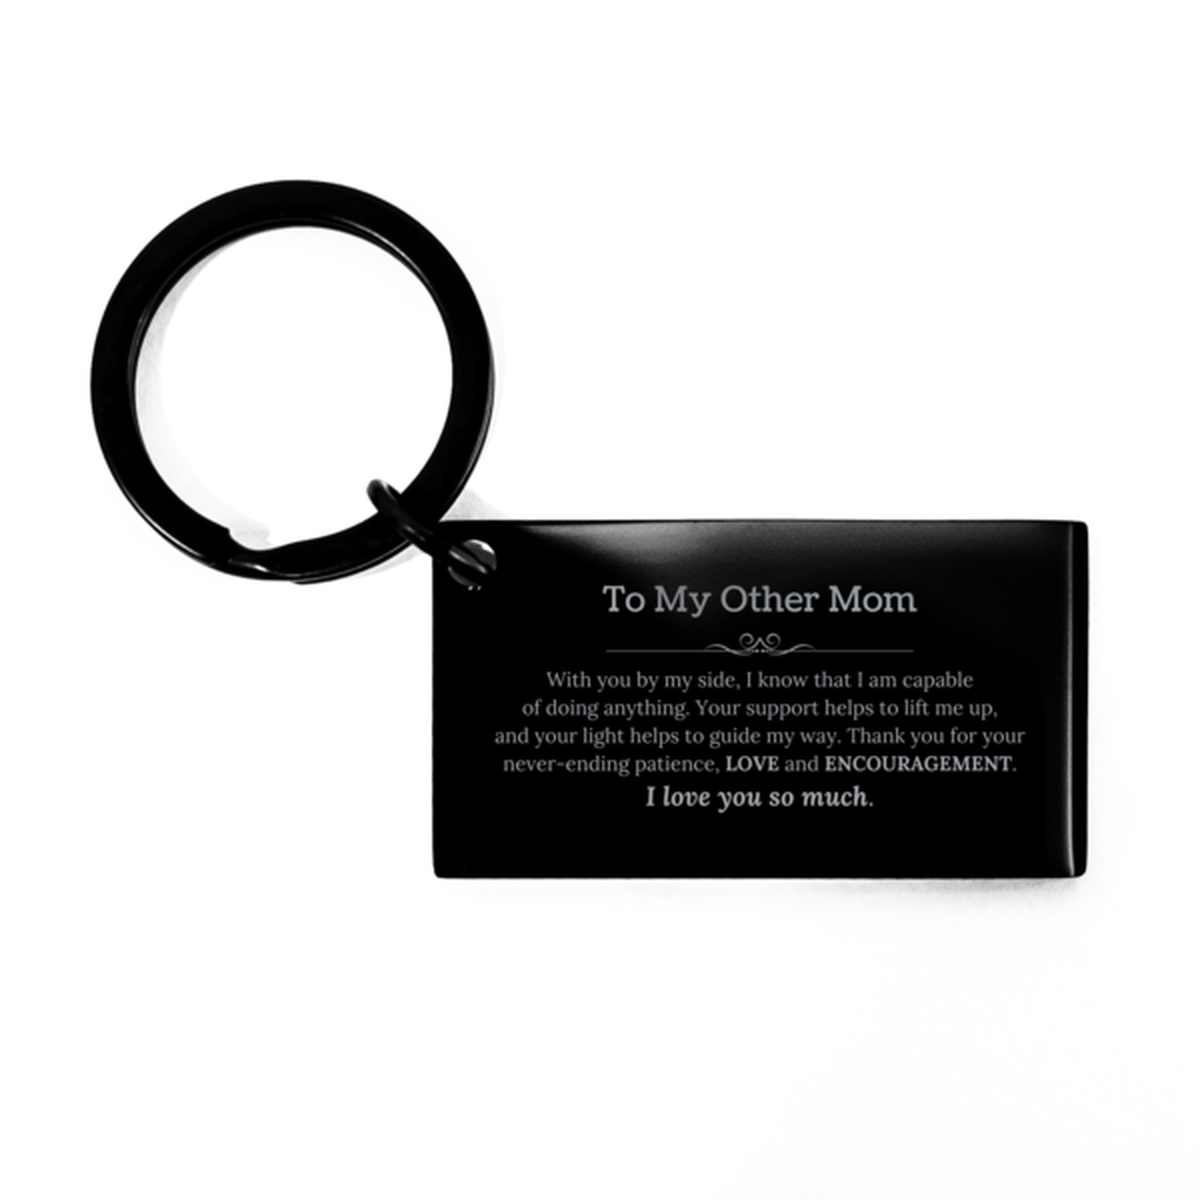 Appreciation Other Mom Keychain Gifts, To My Other Mom Birthday Christmas Wedding Keepsake Gifts for Other Mom With you by my side, I know that I am capable of doing anything. I love you so much